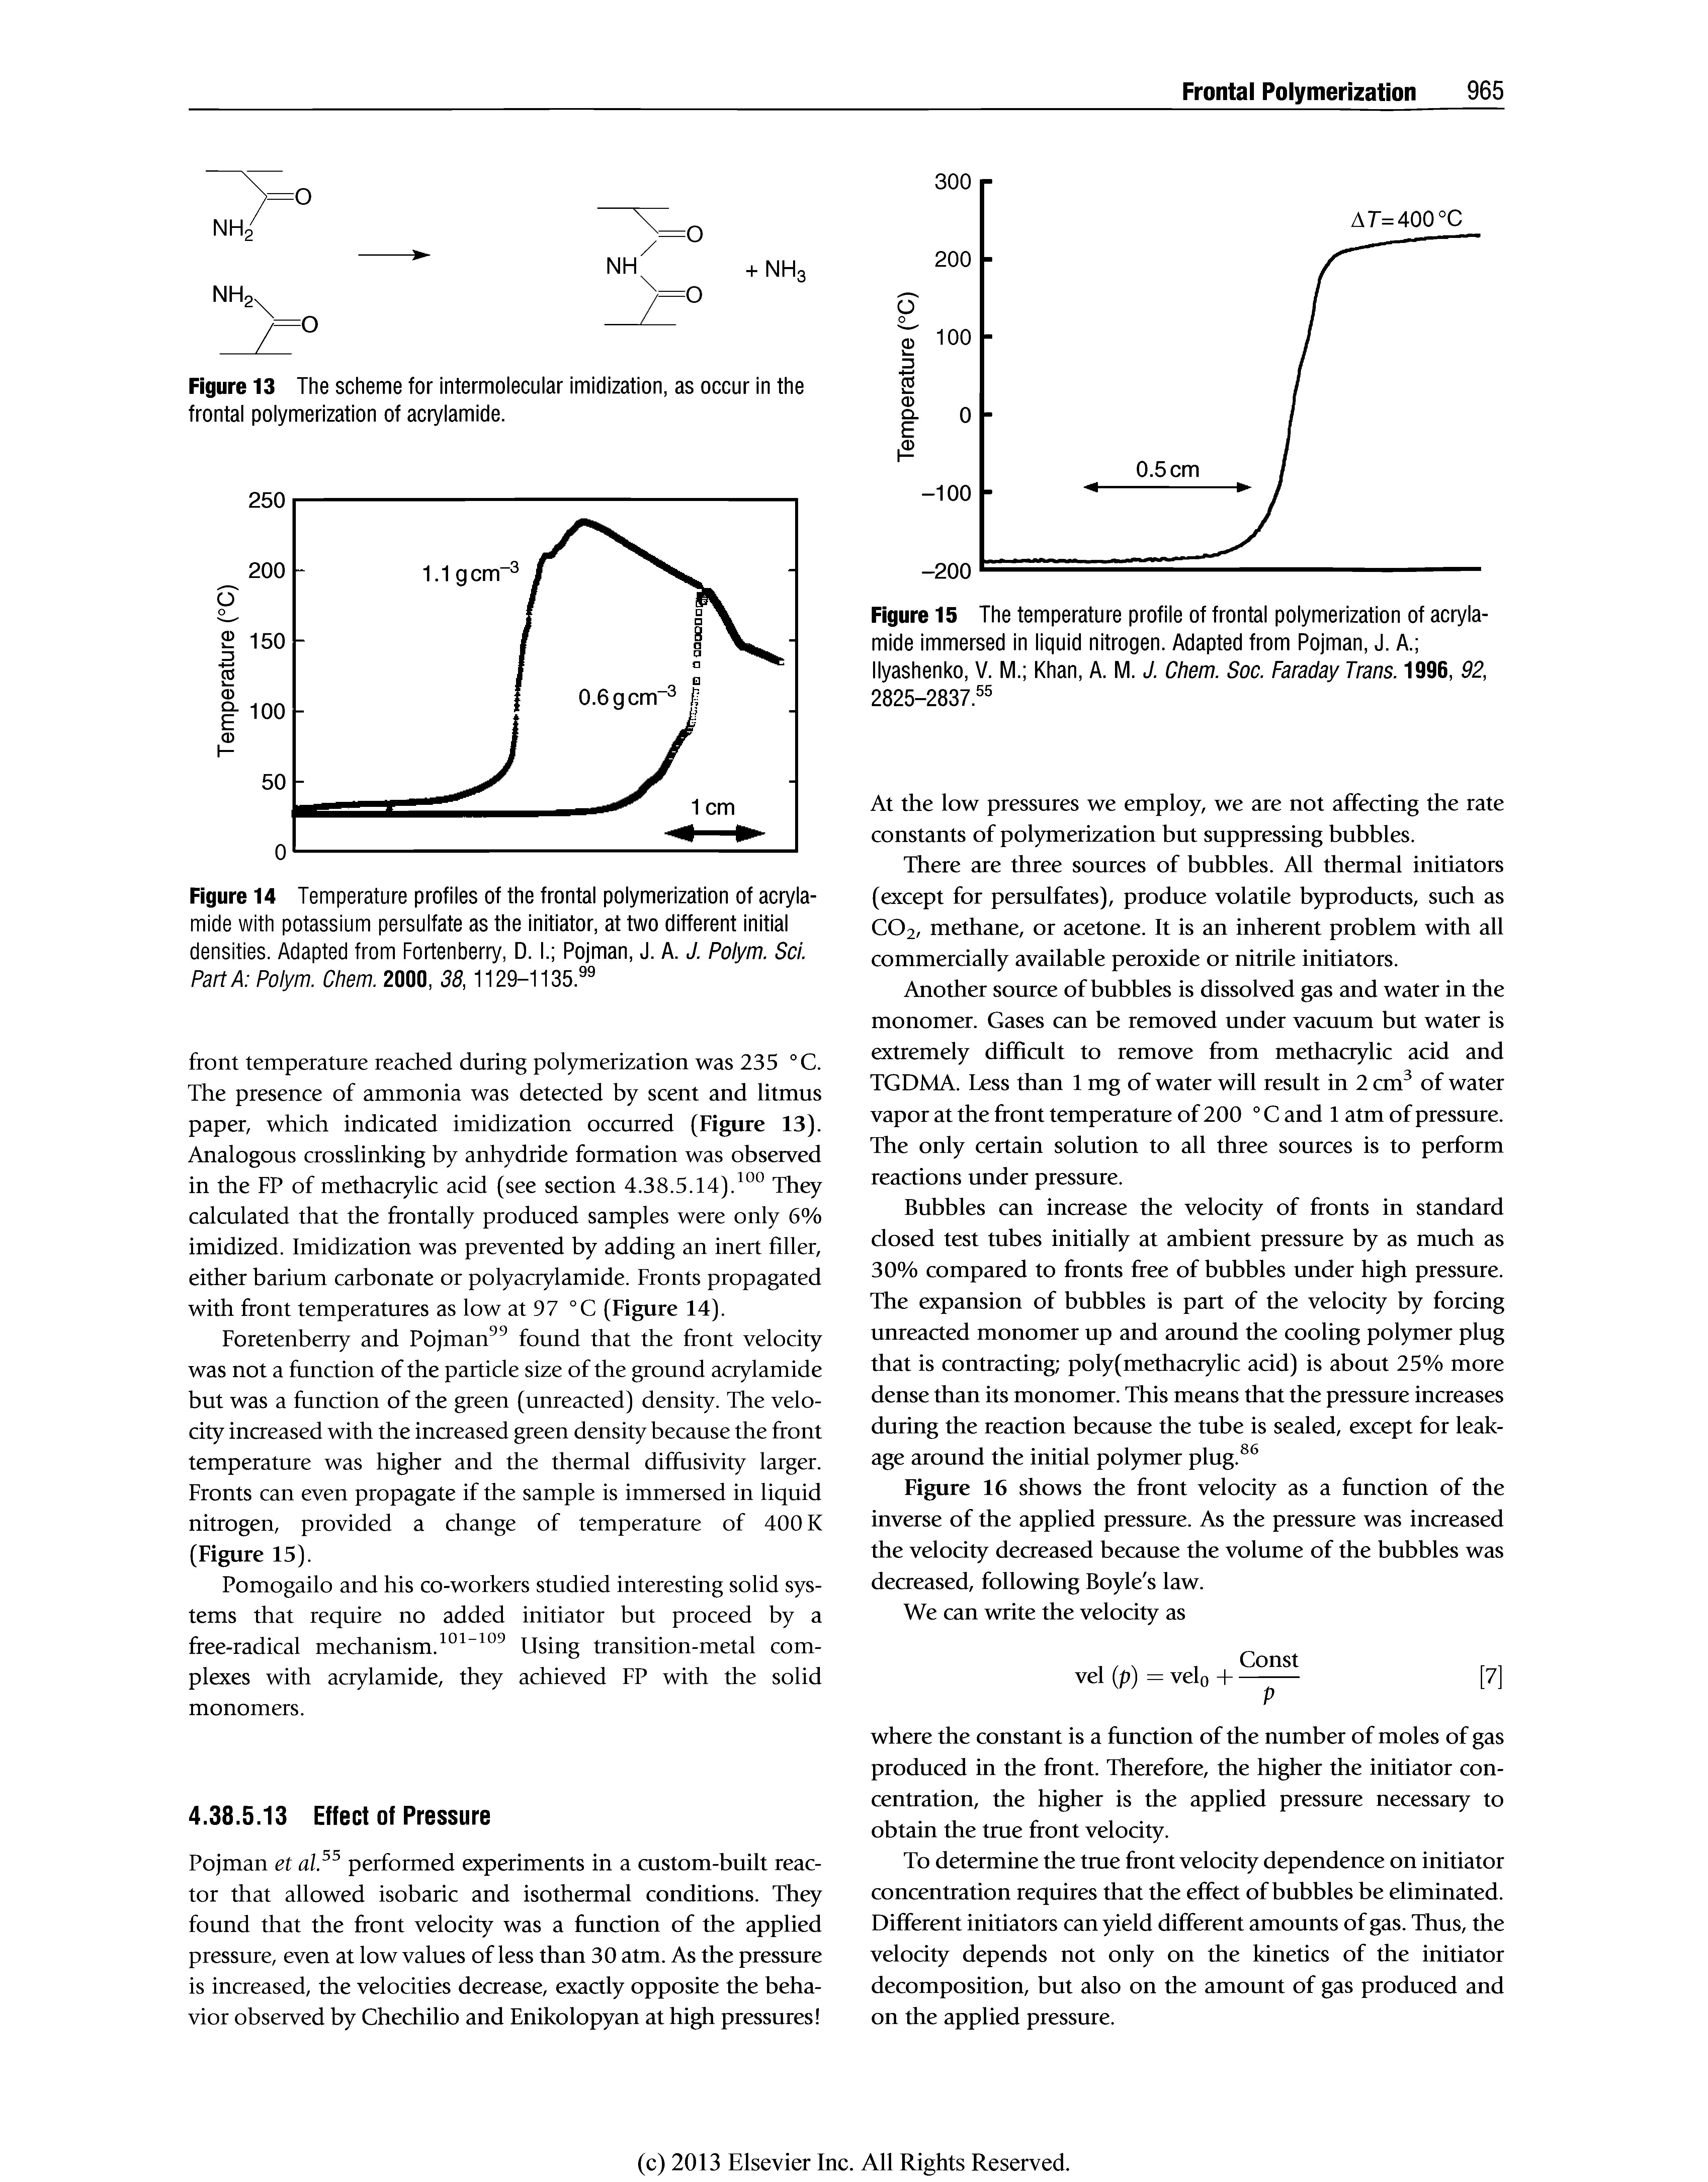 Figure 15 The temperature profile of frontal polymerization of acrylamide immersed in liquid nitrogen. Adapted from Pojman, J. A. Ilyashenko, V. M. Khan, A. M. J. Chem. Soc. Faraday Trans. 1996, 92, 2825-2837. ...